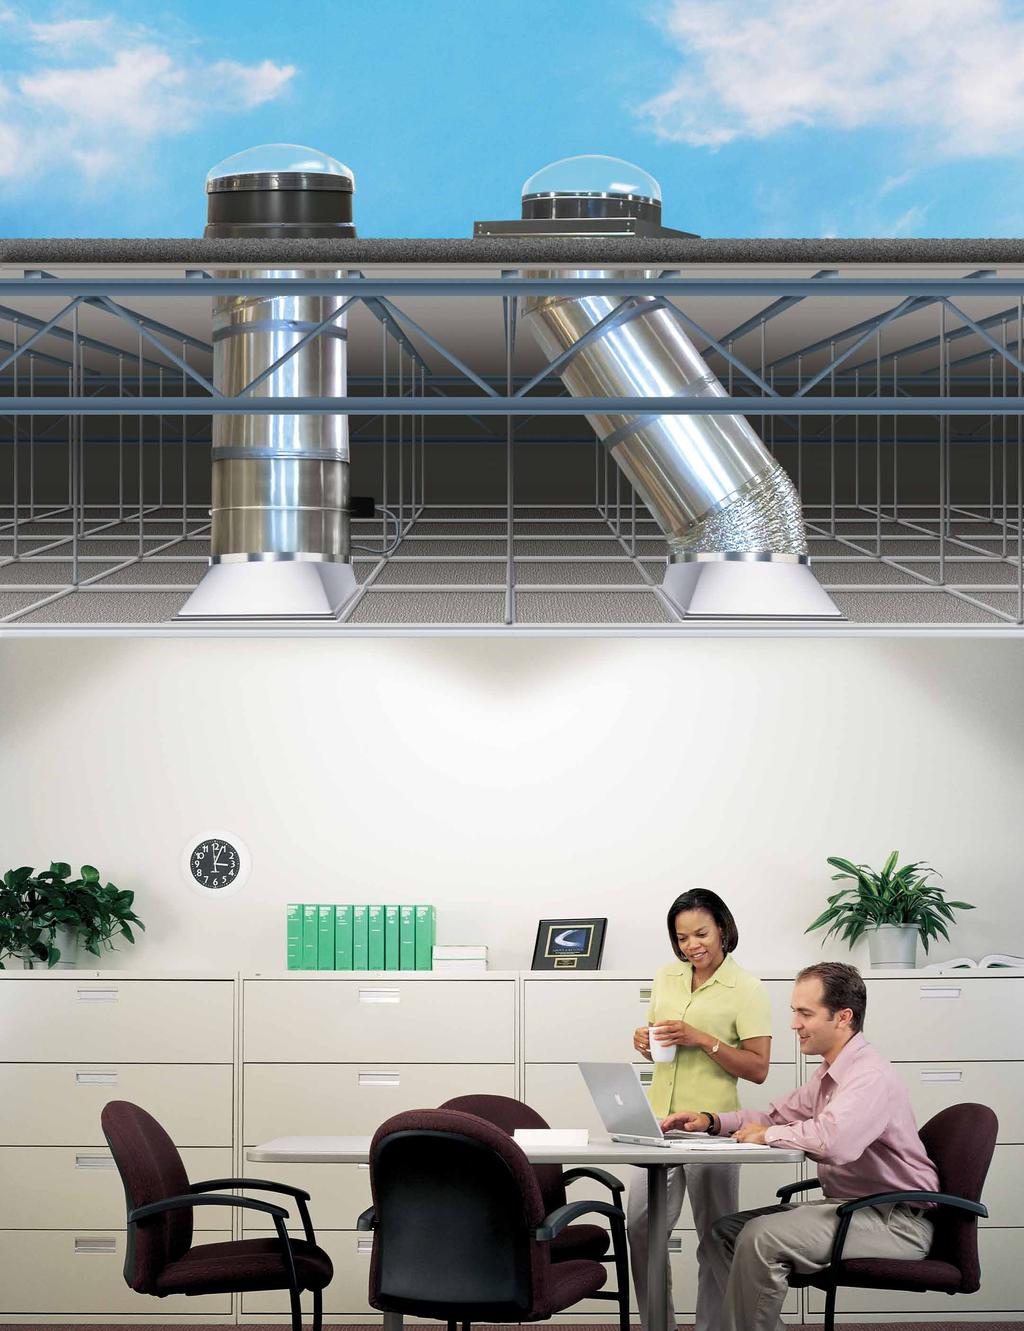 Commercial SUN TUNNEL skylight (TCR) Areas with a drop ceiling, long shaft applications and interior area of buildings all lend themselves to the commercial SUN TUNNEL skylight.